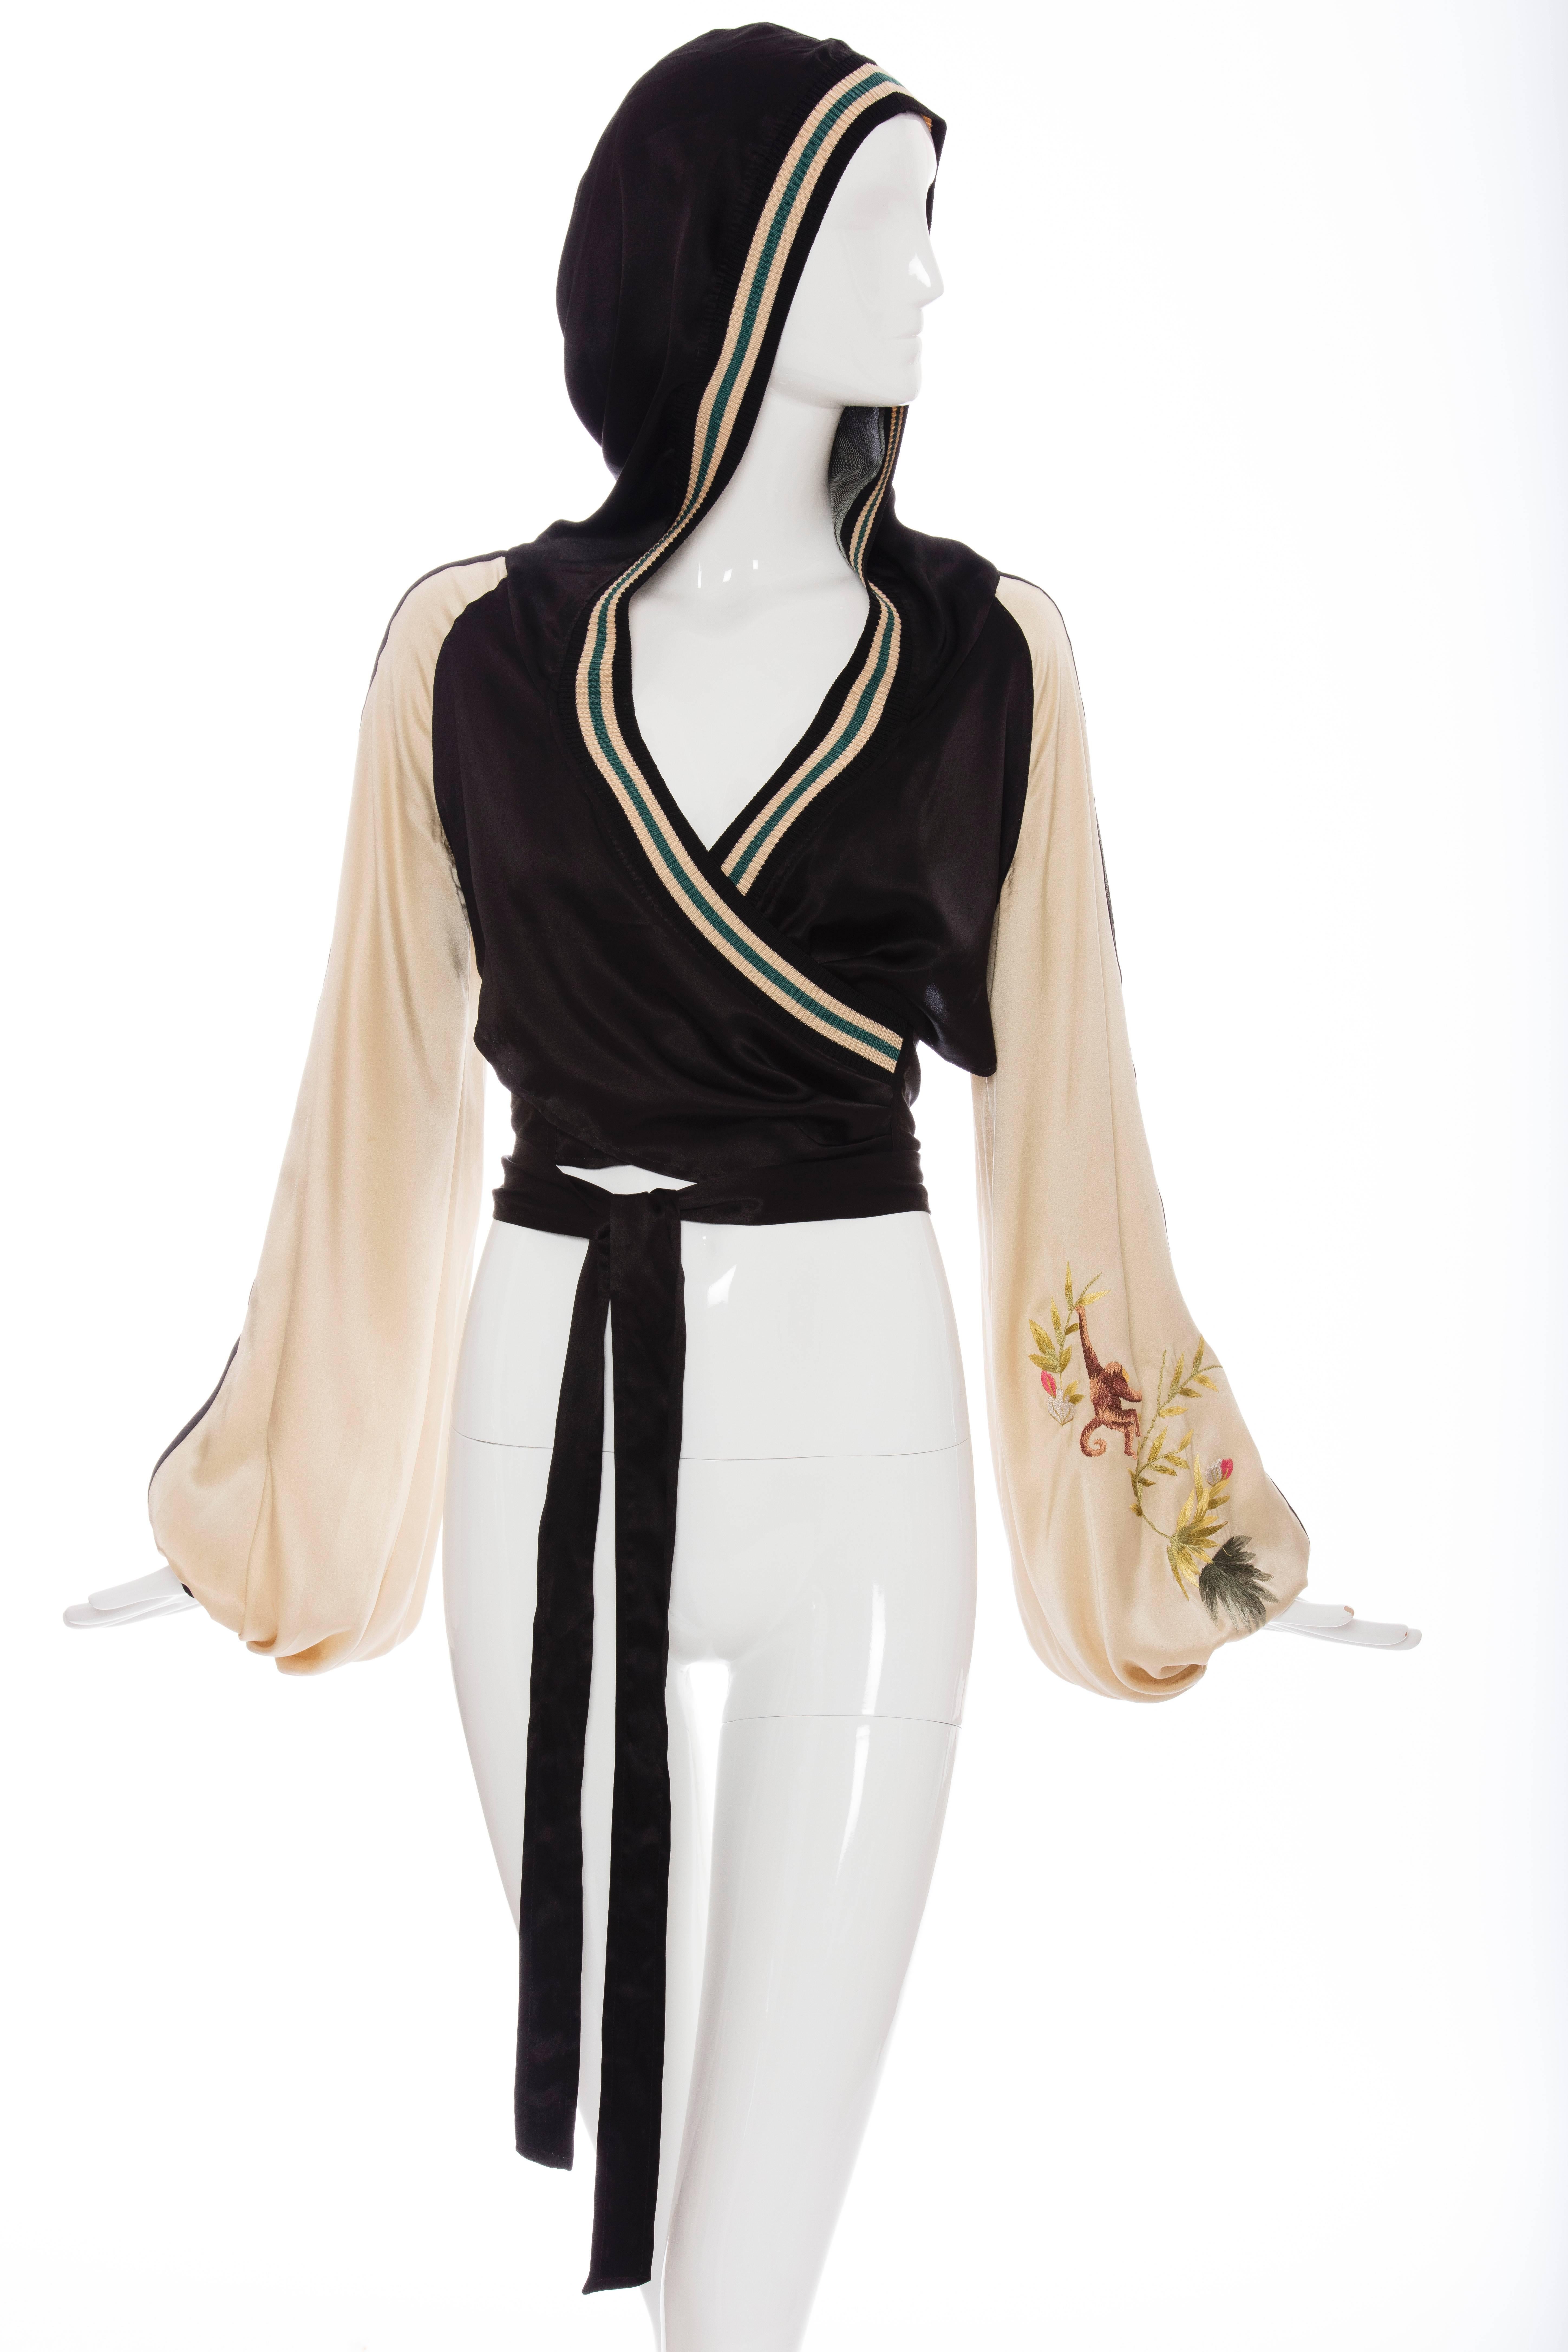 Jean Paul Gaultier, Spring 2007 silk long sleeve bolero with open front featuring sash tie panel, embroidered detail at sleeve, hood at back,